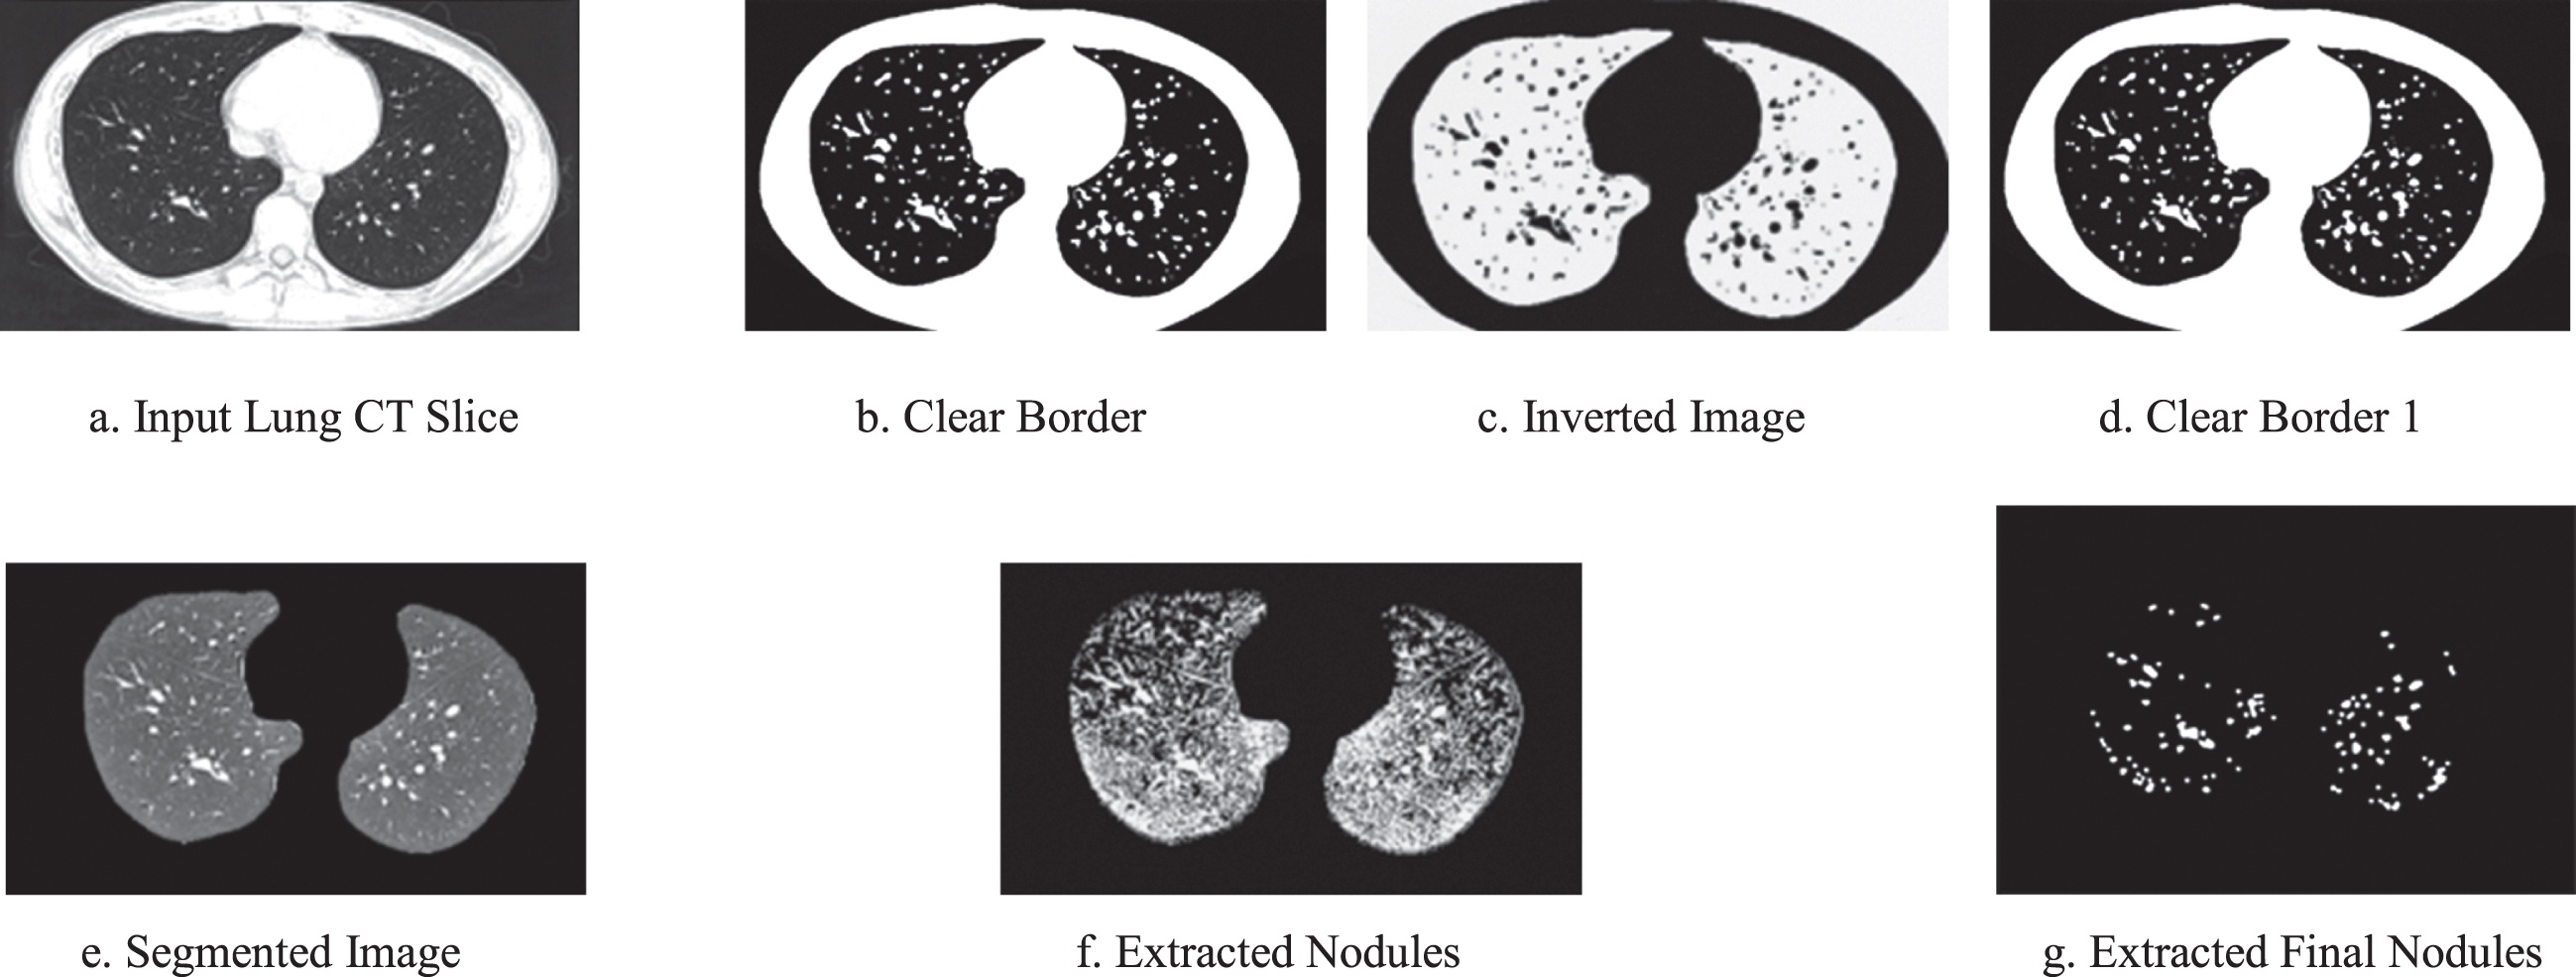 a –3 g. Experimental images obtained for Normal Lung Slices.